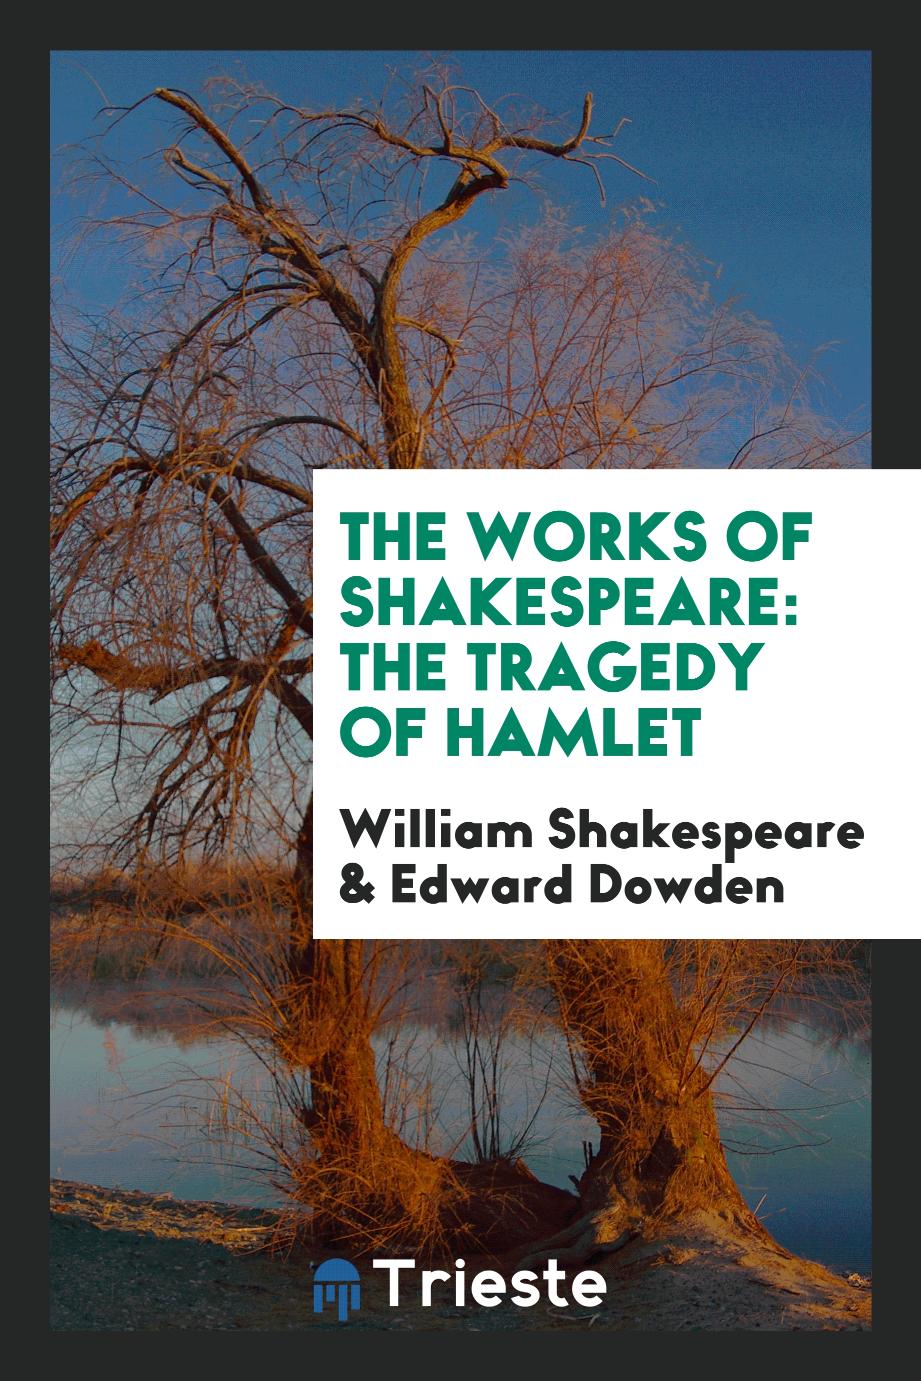 The Works of Shakespeare: The Tragedy of Hamlet